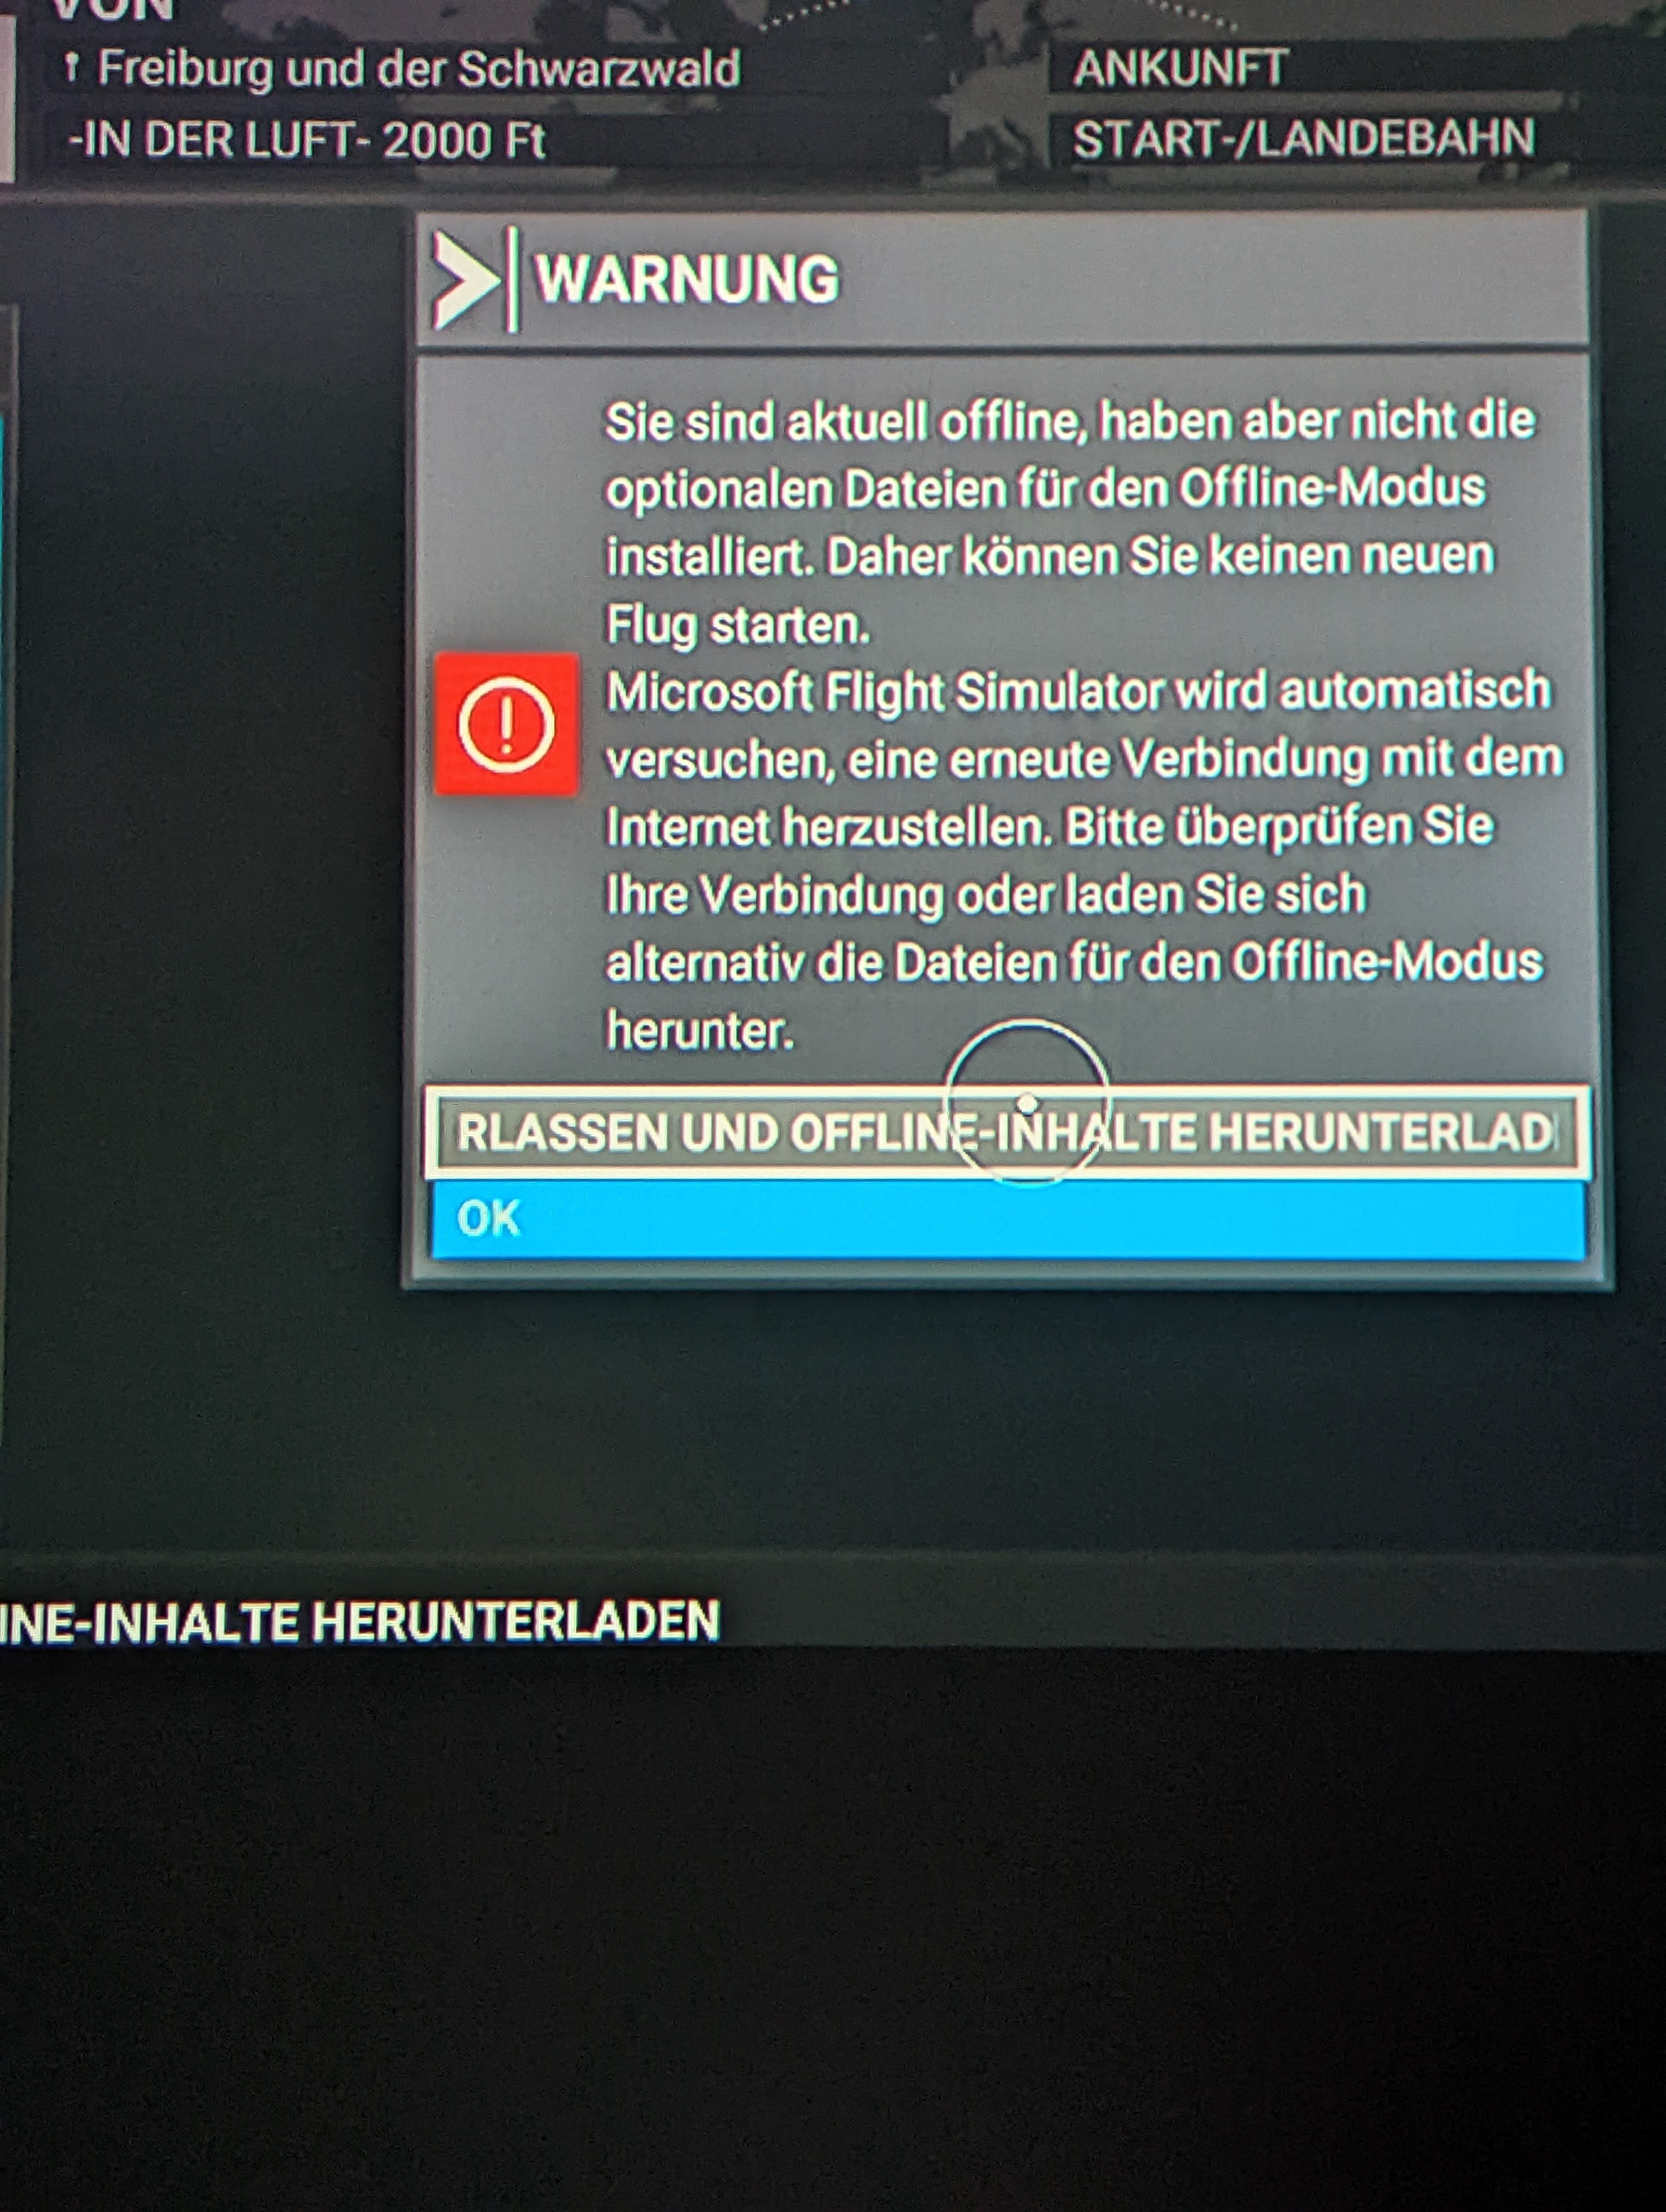 Every time I try to use Xbox cloud gaming, I get this error (Note